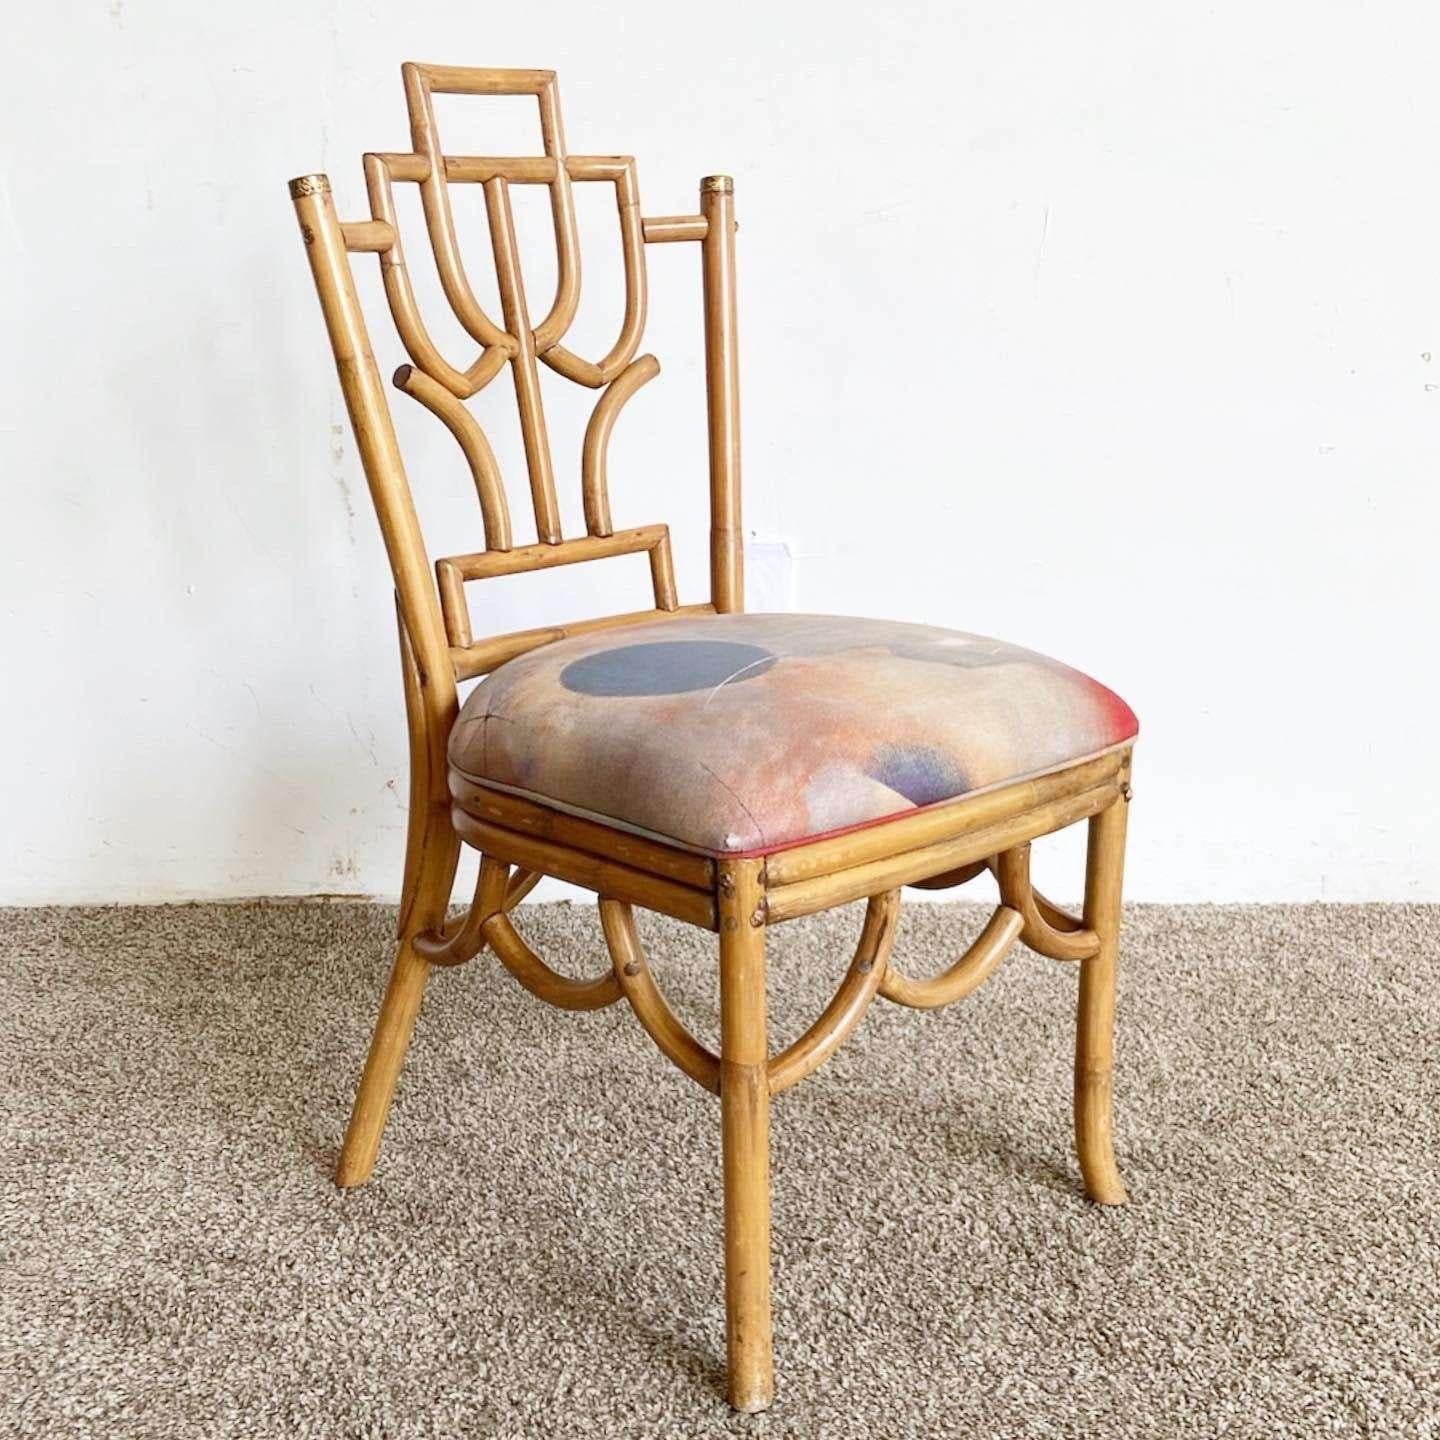 Exceptional vintage bohemian bamboo side chair. Features a fantastic back rest with brass accent tips.

Seat height is 19.25 in